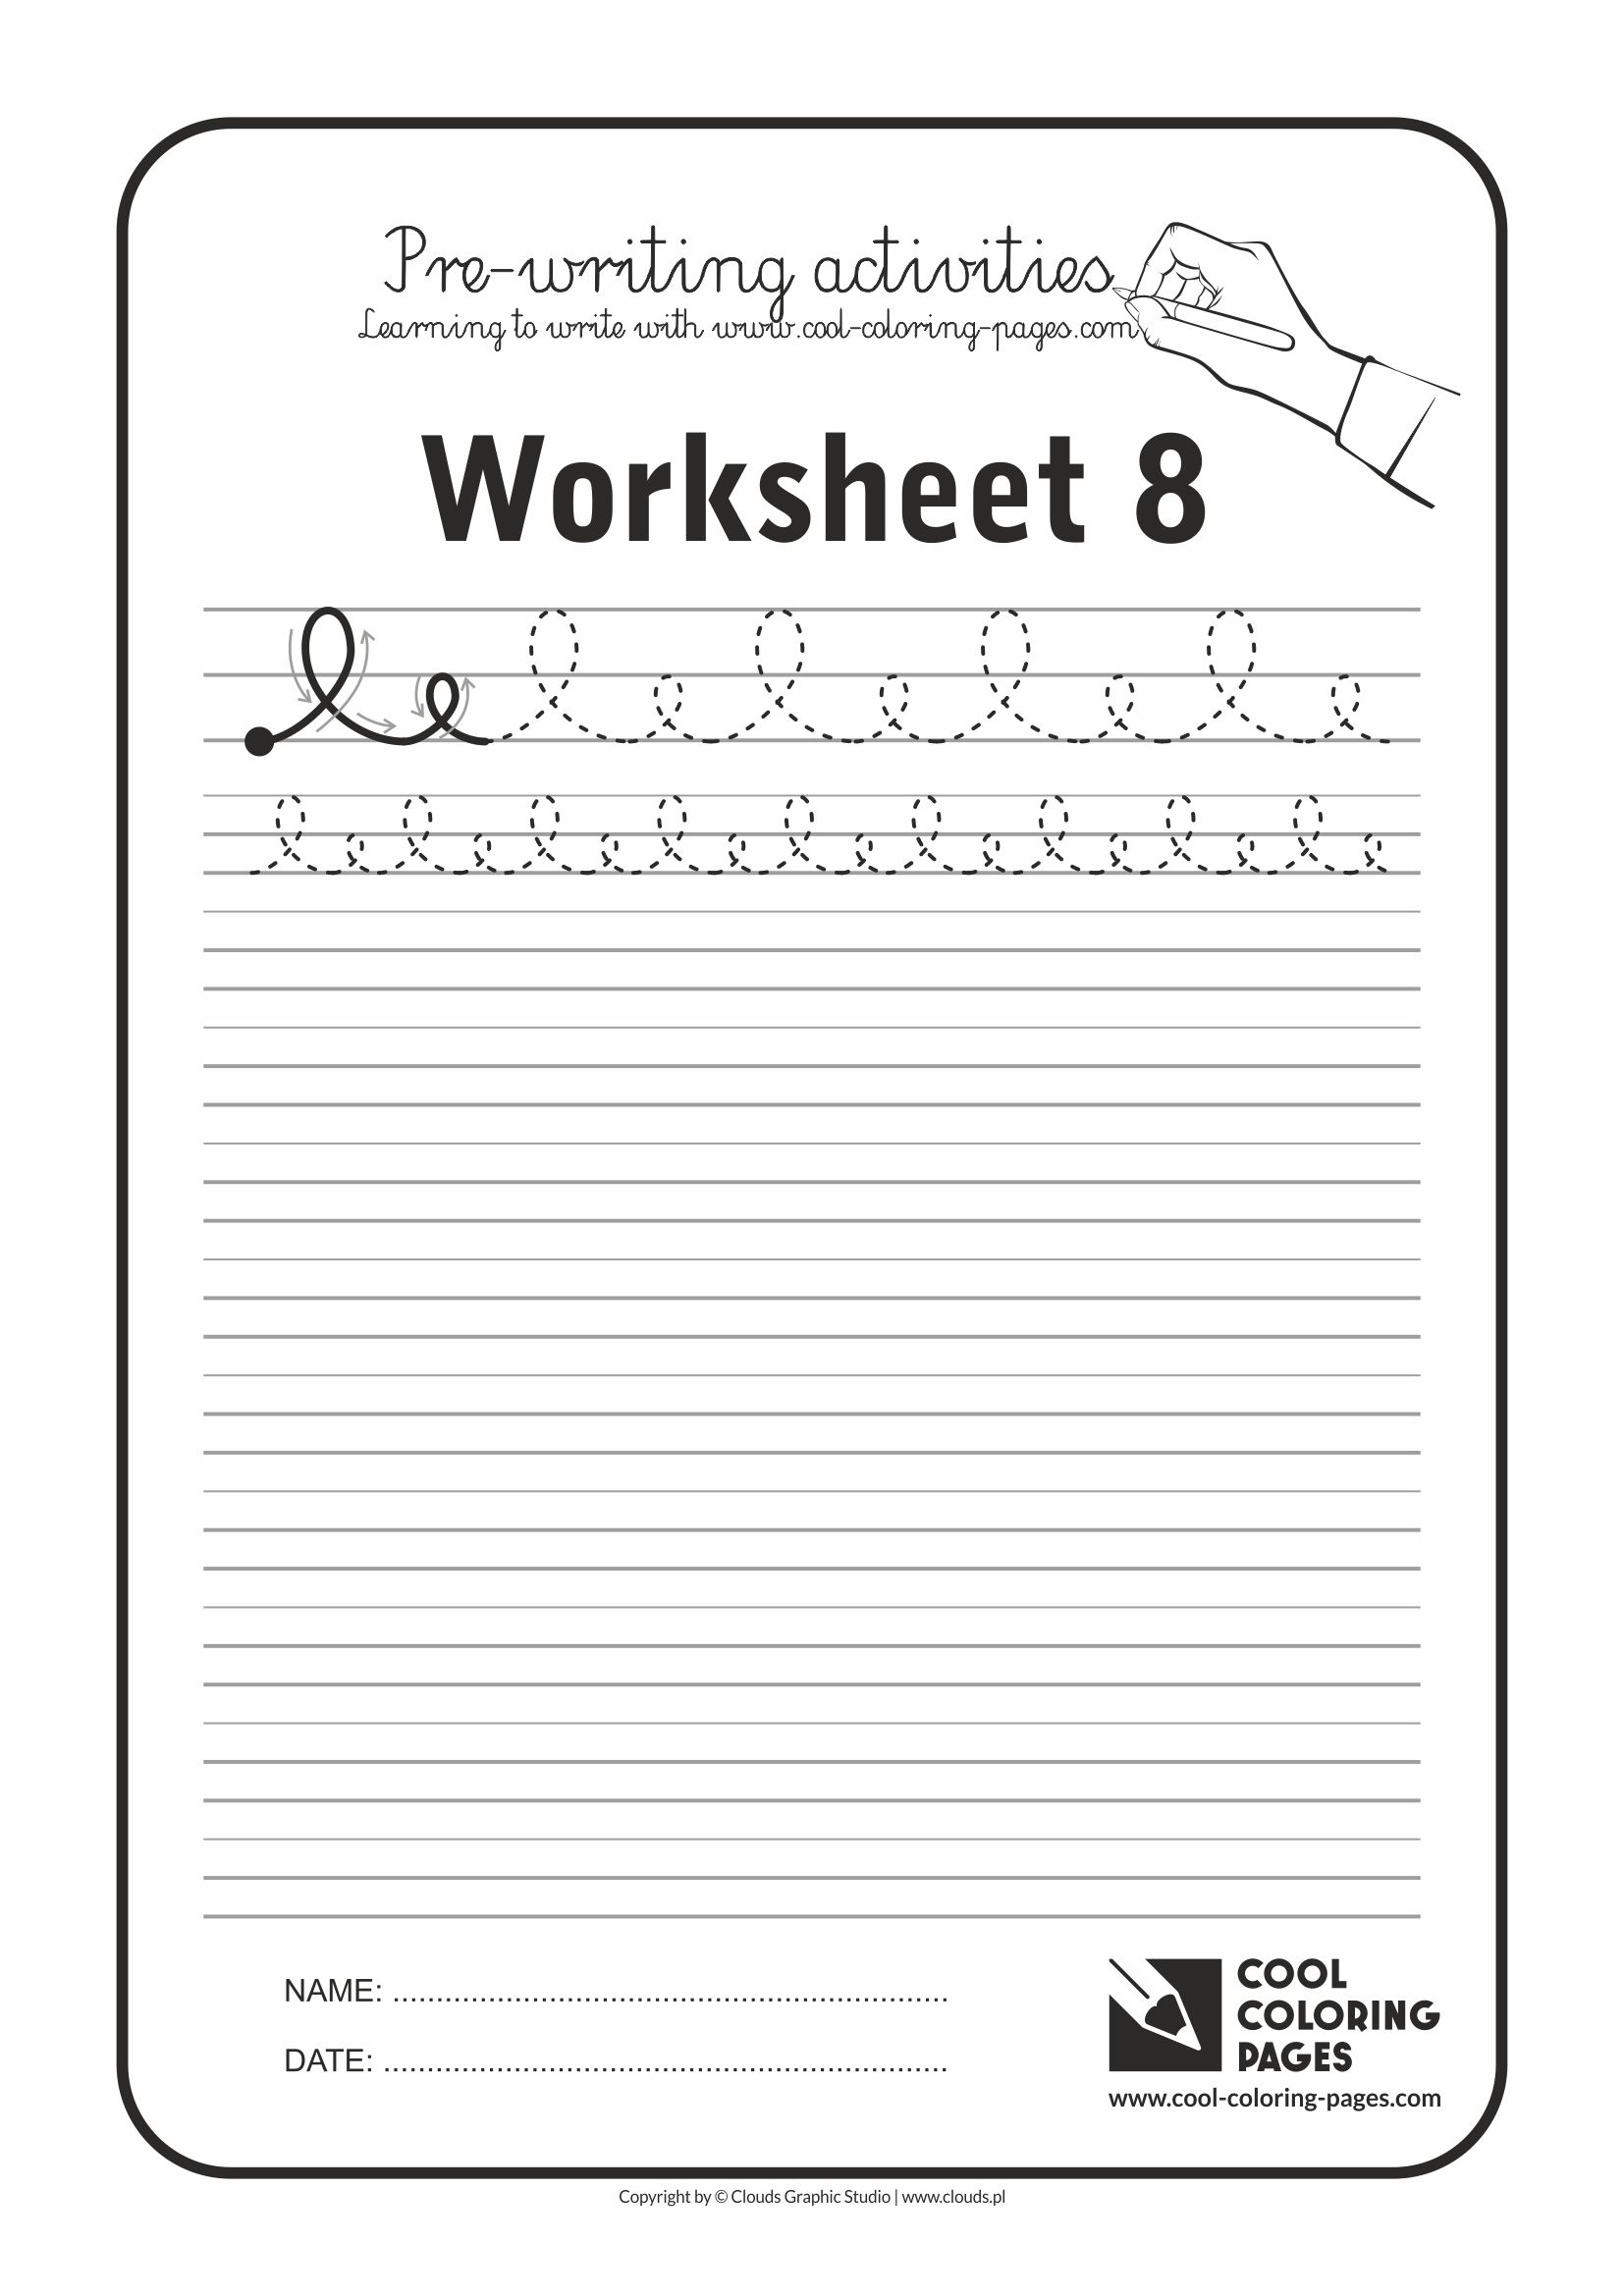 Cool Coloring Pages / Pre-writing activities / Worksheet no.8